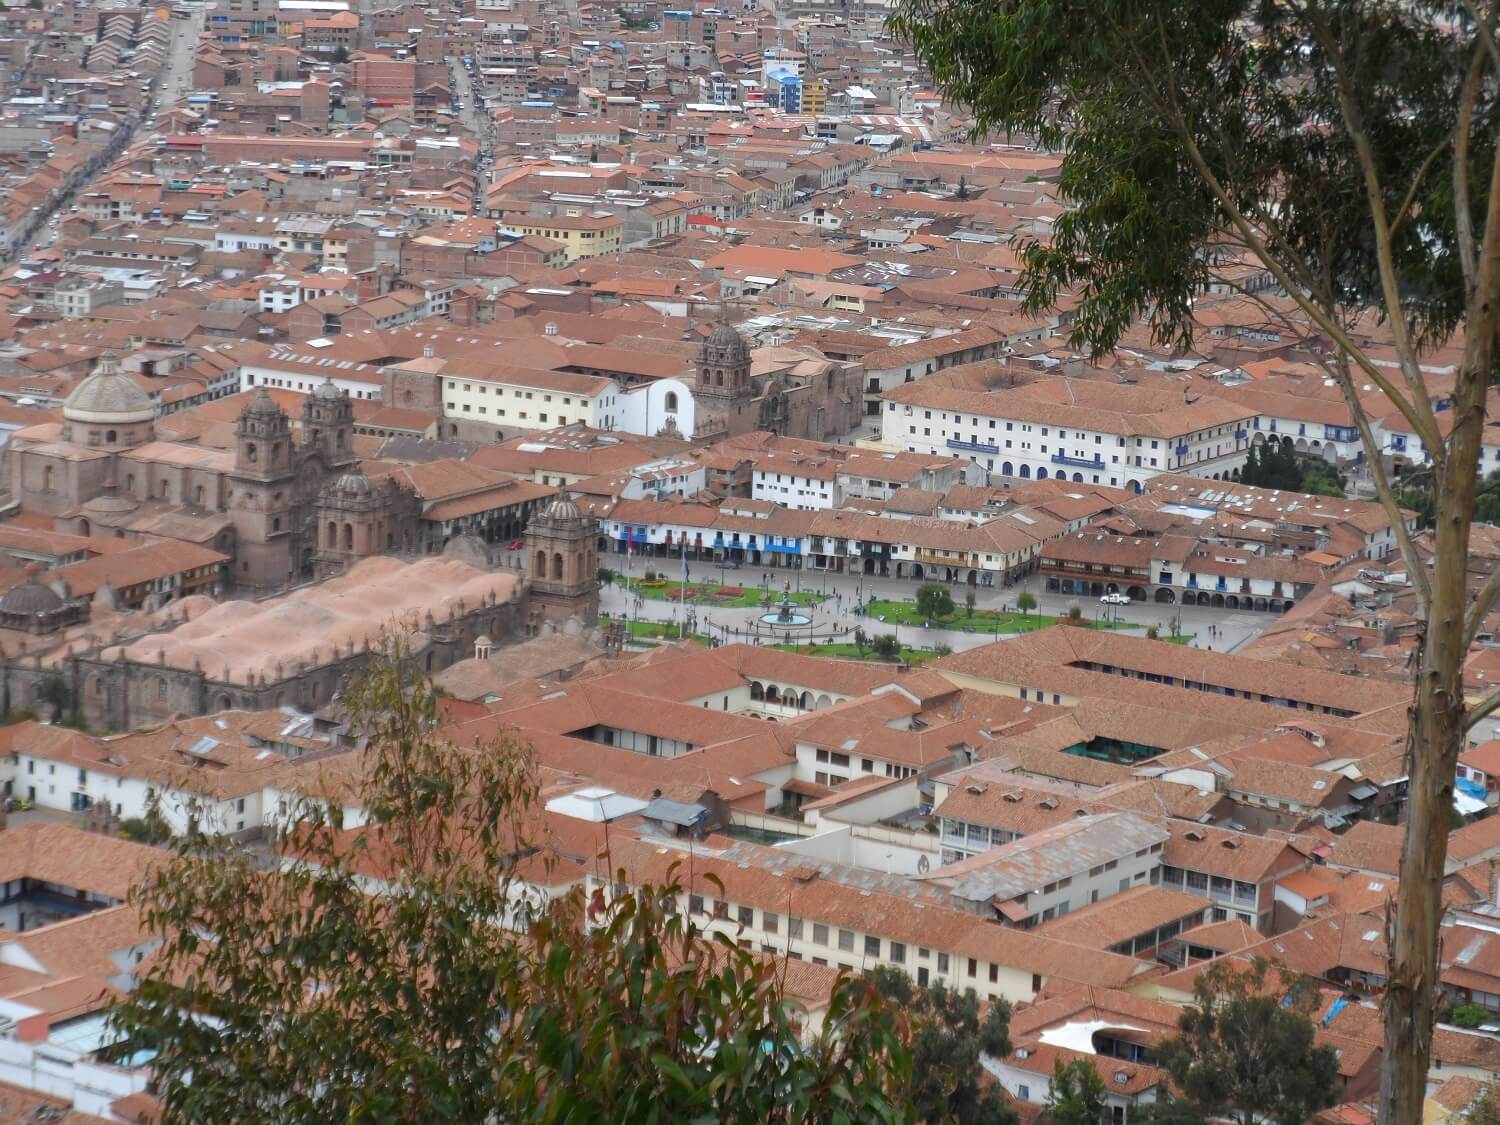 11View to the historic center of Cusco, with the Plaza de Armas, churches and tiled rooftops. Visit Cusco alternatively with RESPONSible Travel Peru!